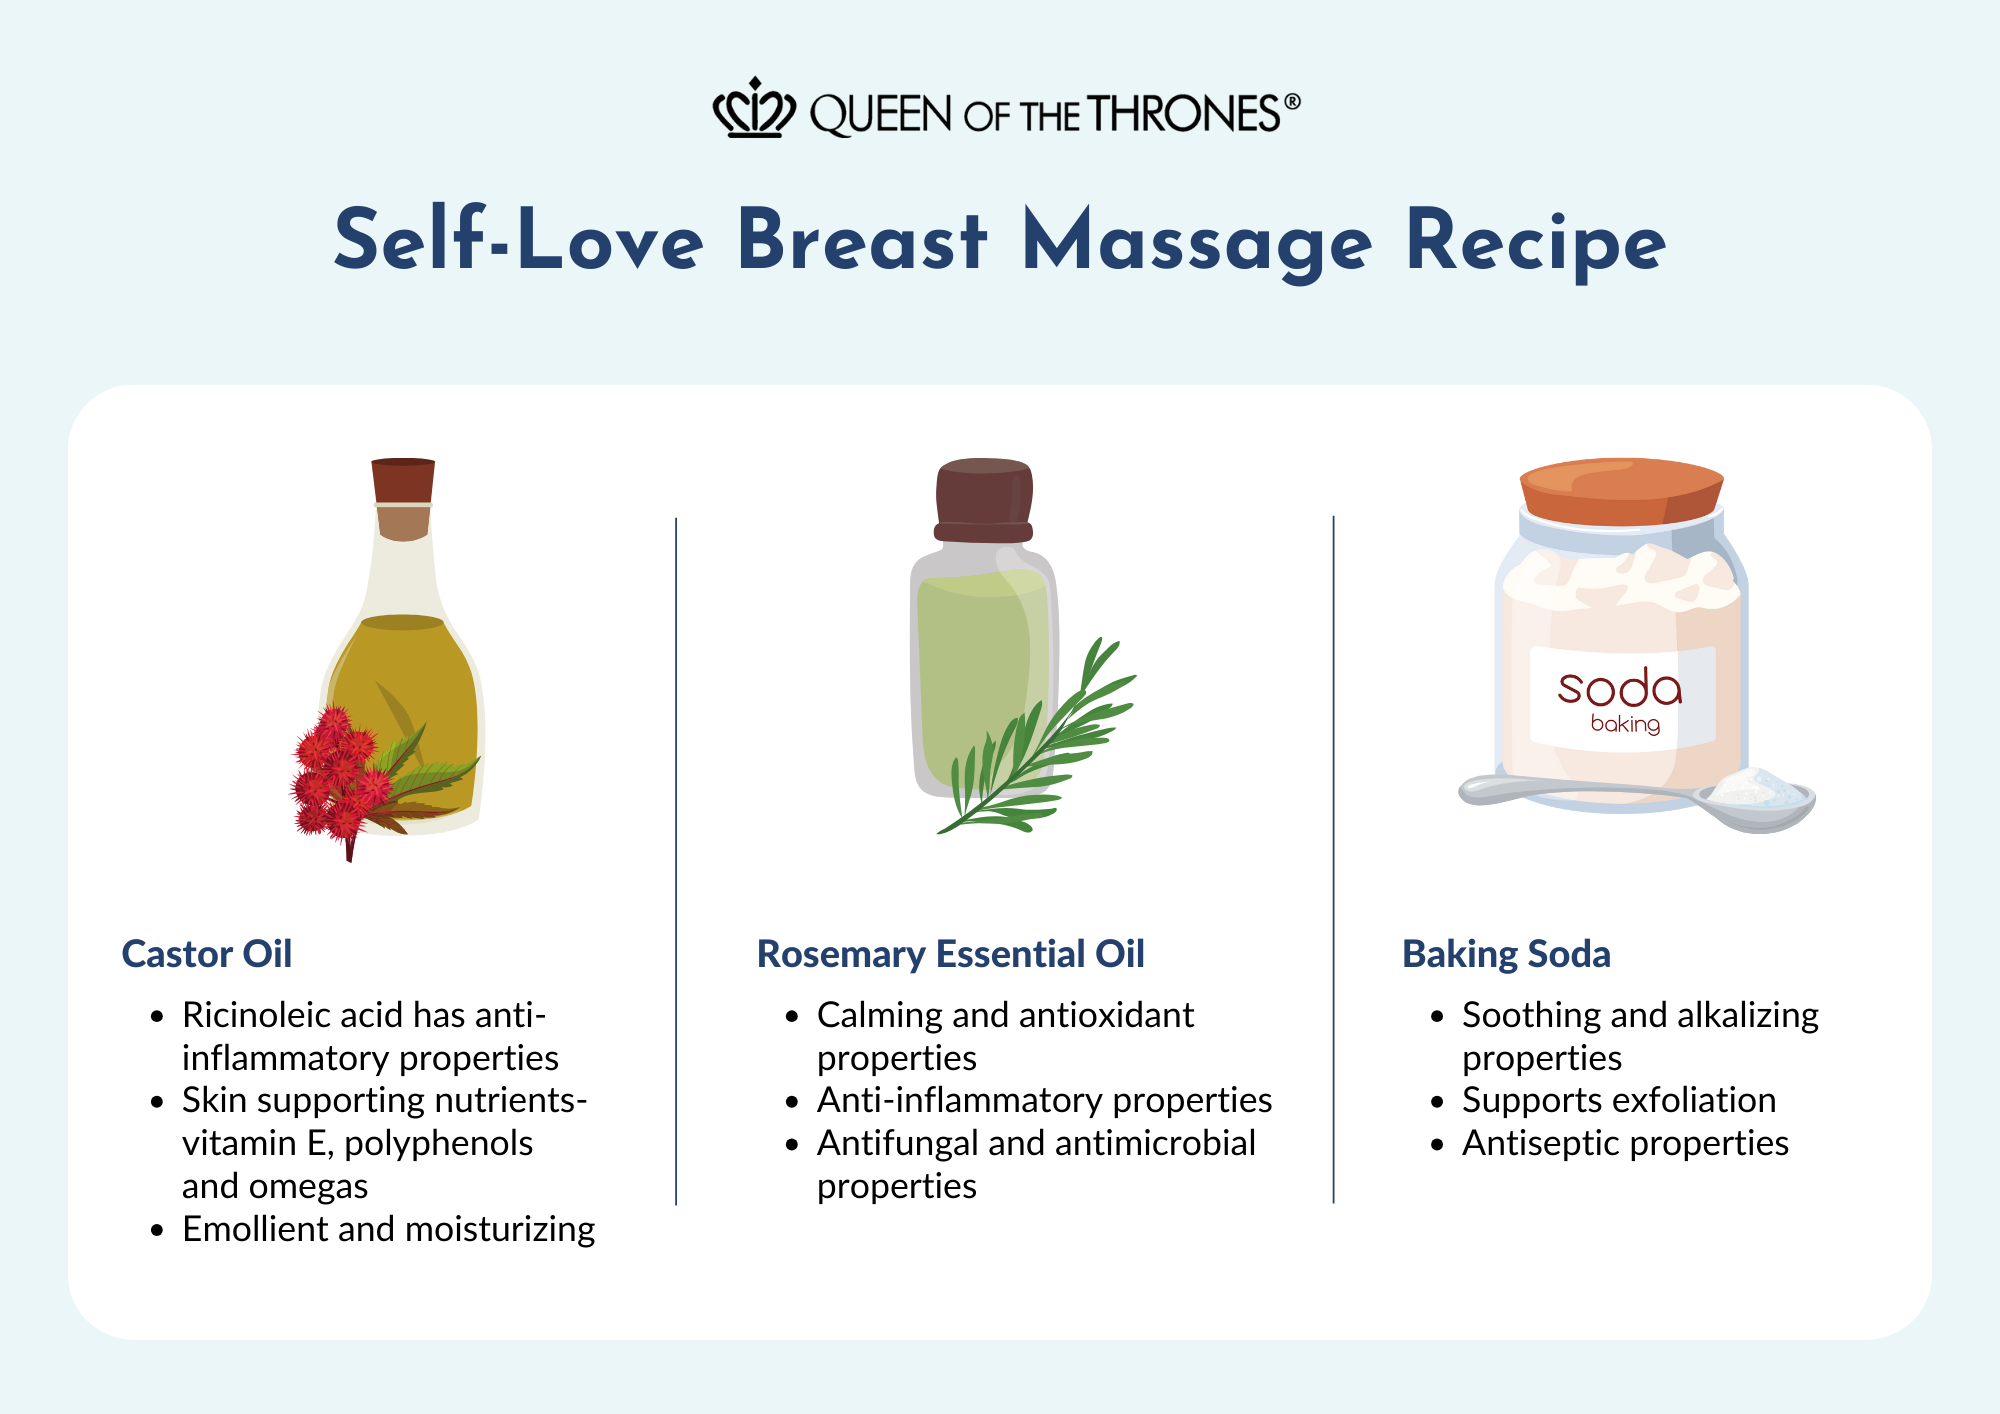 Breast massage recipe by Queen of the Thrones 